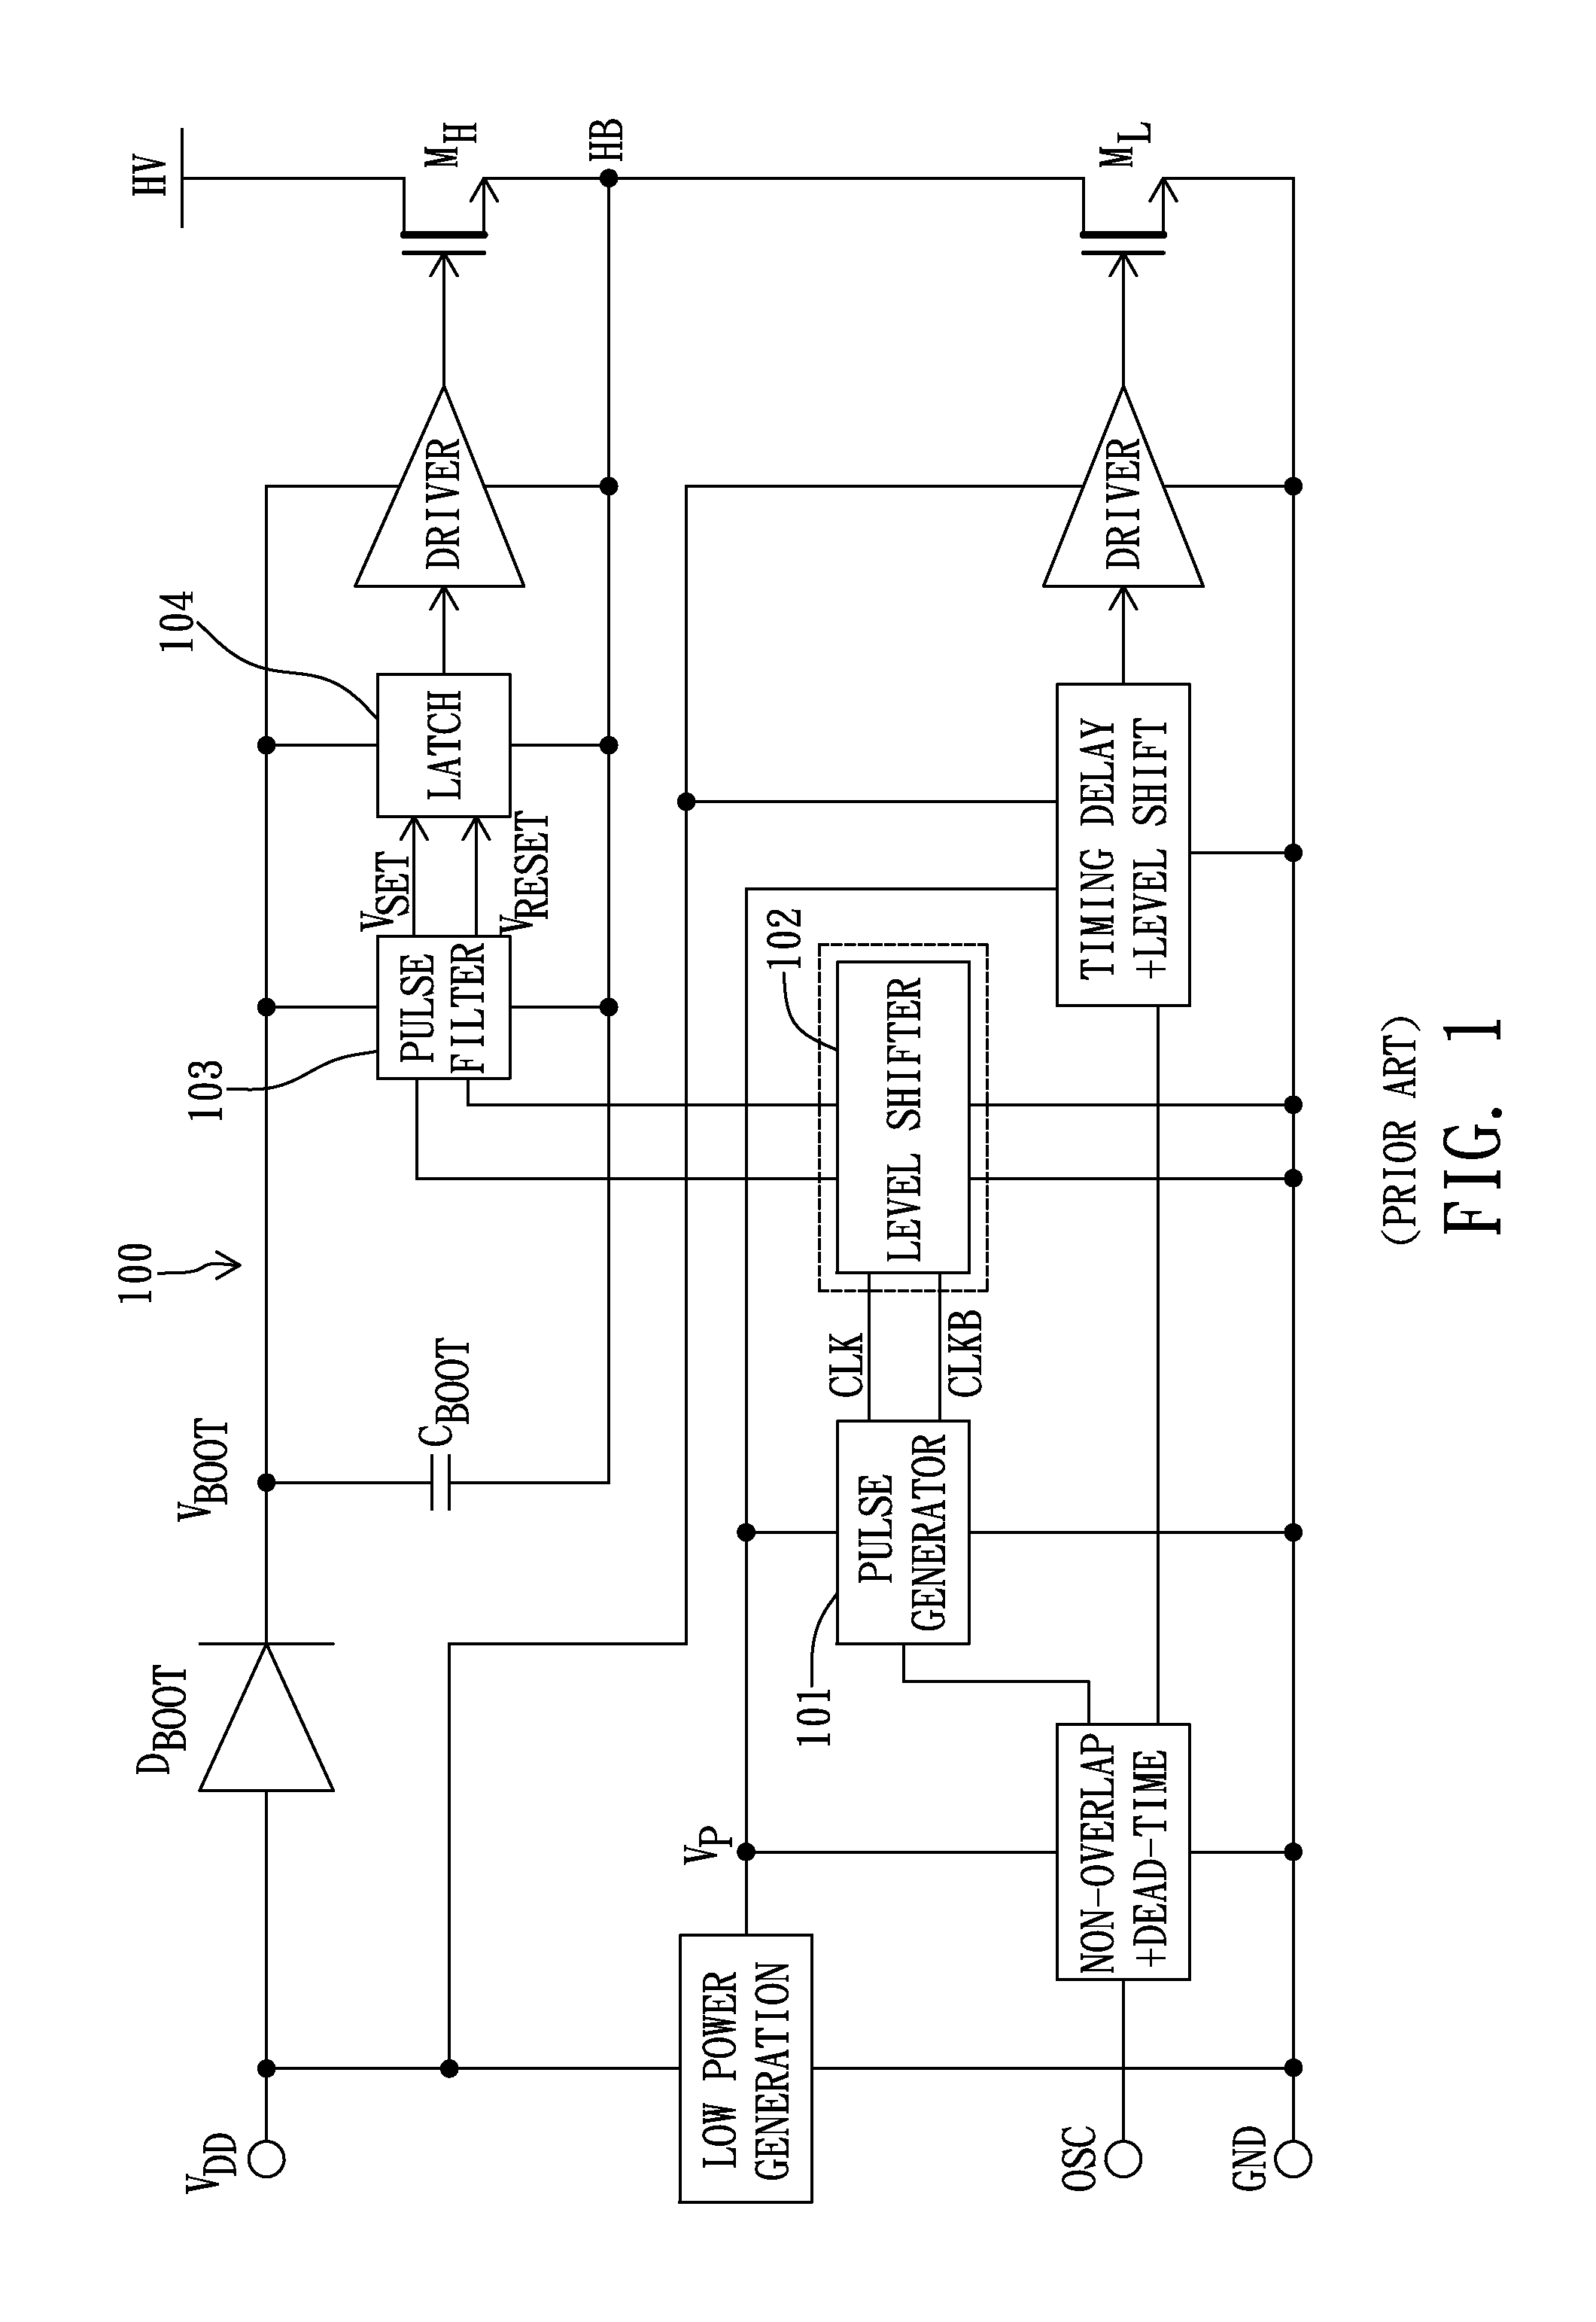 Level shifter capable of pulse filtering and bridge driver using the same